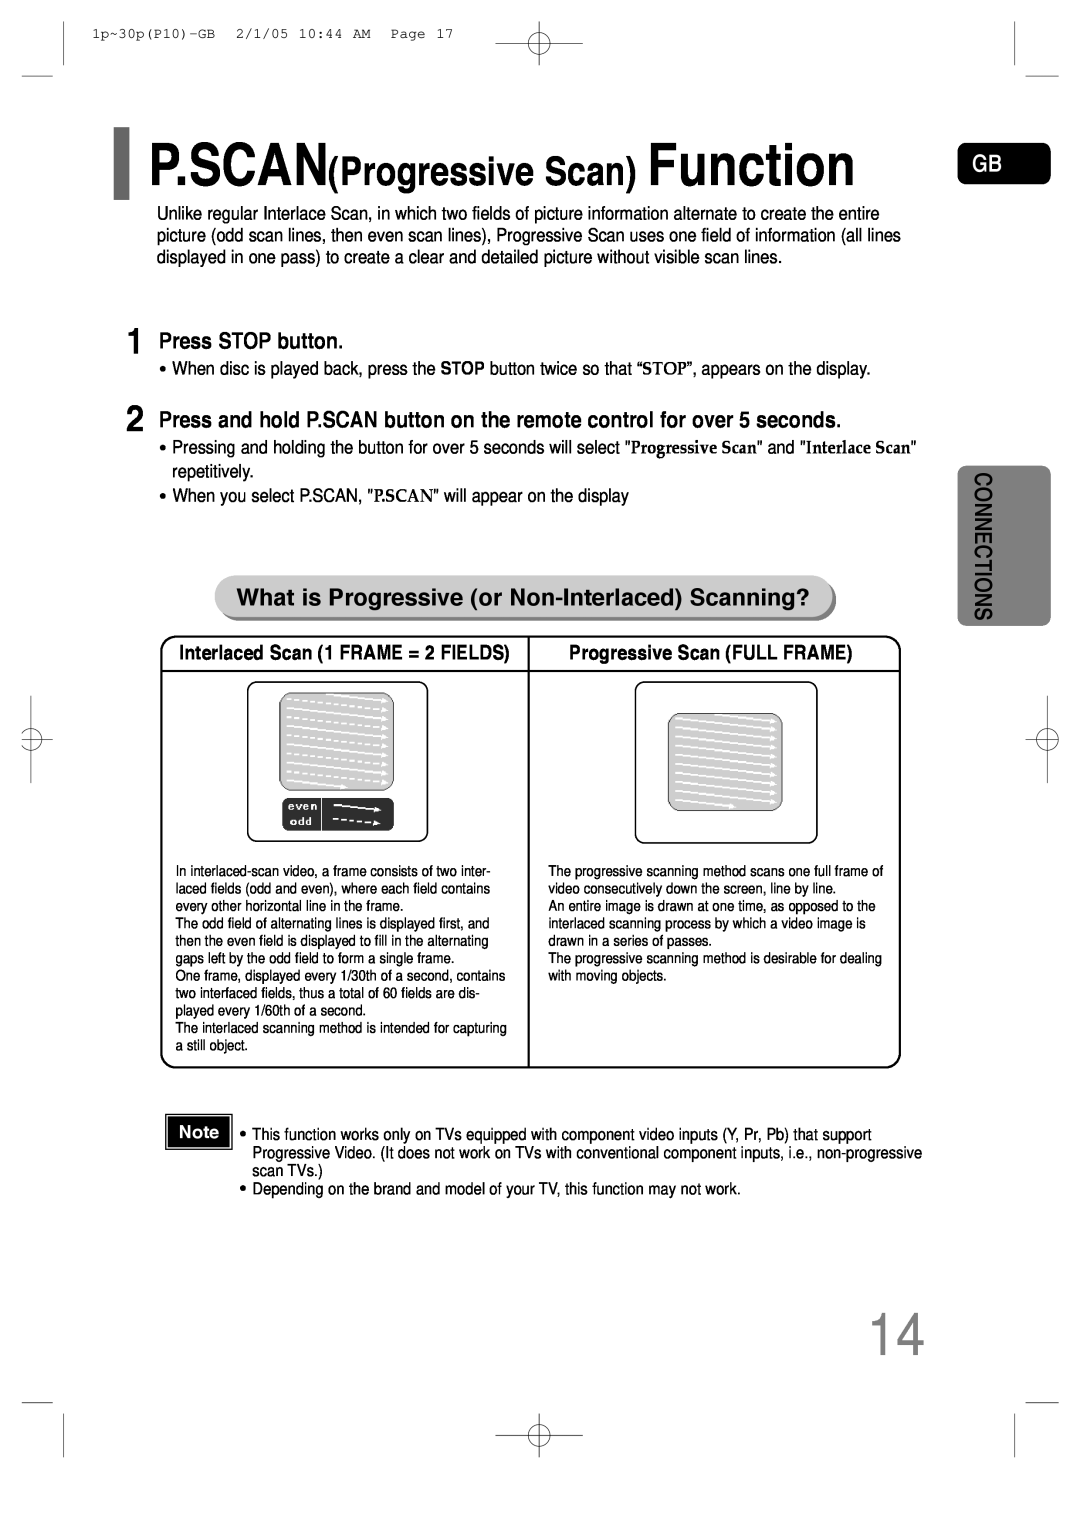 Samsung P10 What is Progressive or Non-InterlacedScanning?, P.SCANProgressive Scan Function, Progressive Scan FULL FRAME 